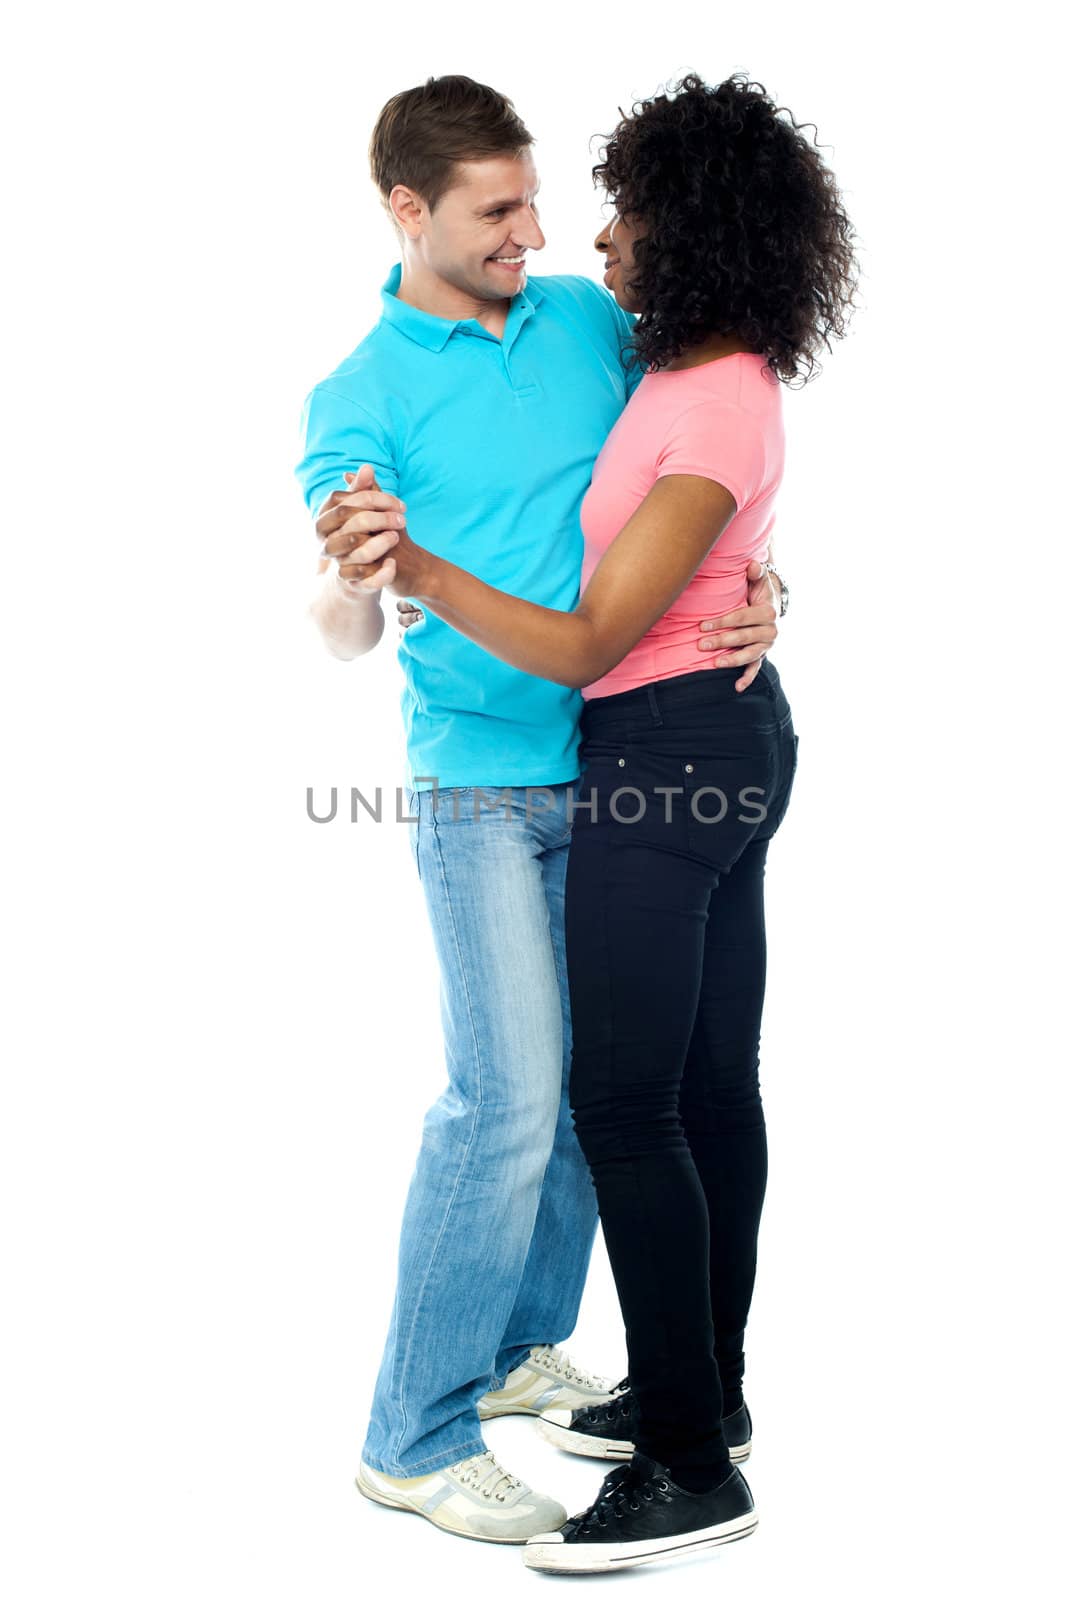 Full length portrait of adorable dancing couple enjoying themselves and getting romantic